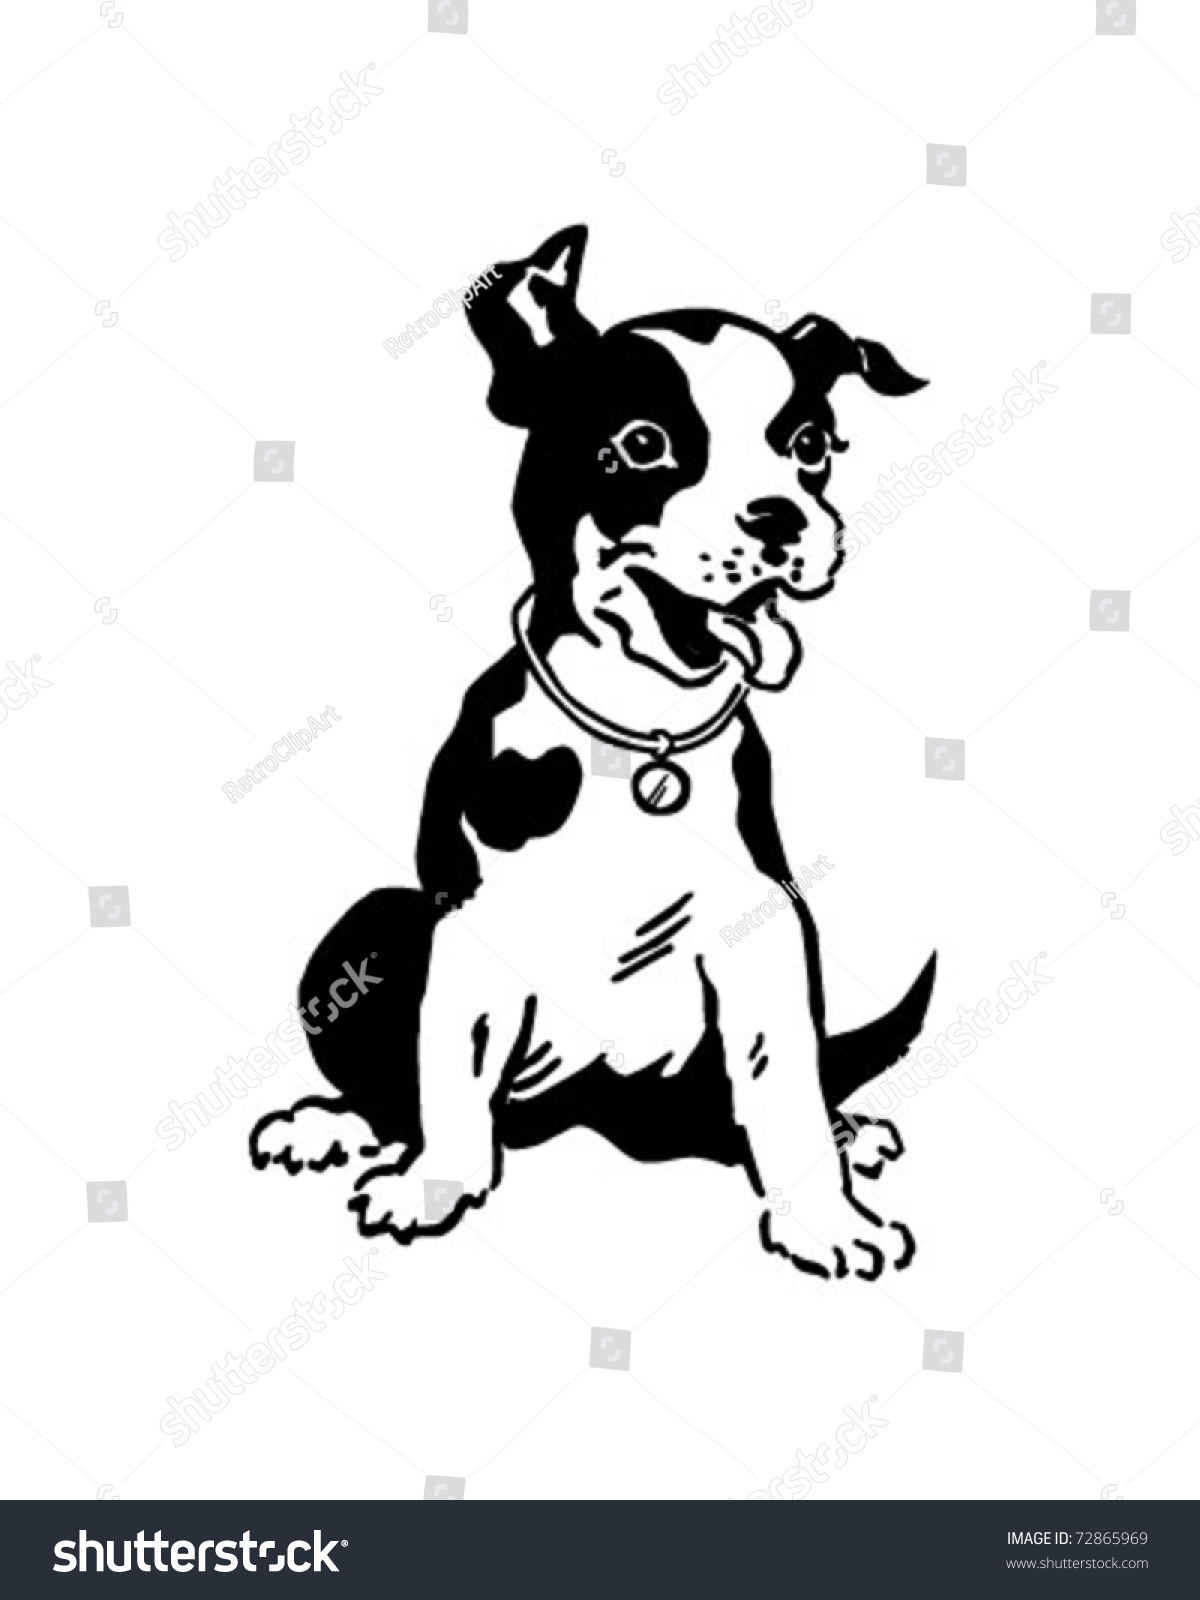 clipart terrier dog - photo #44